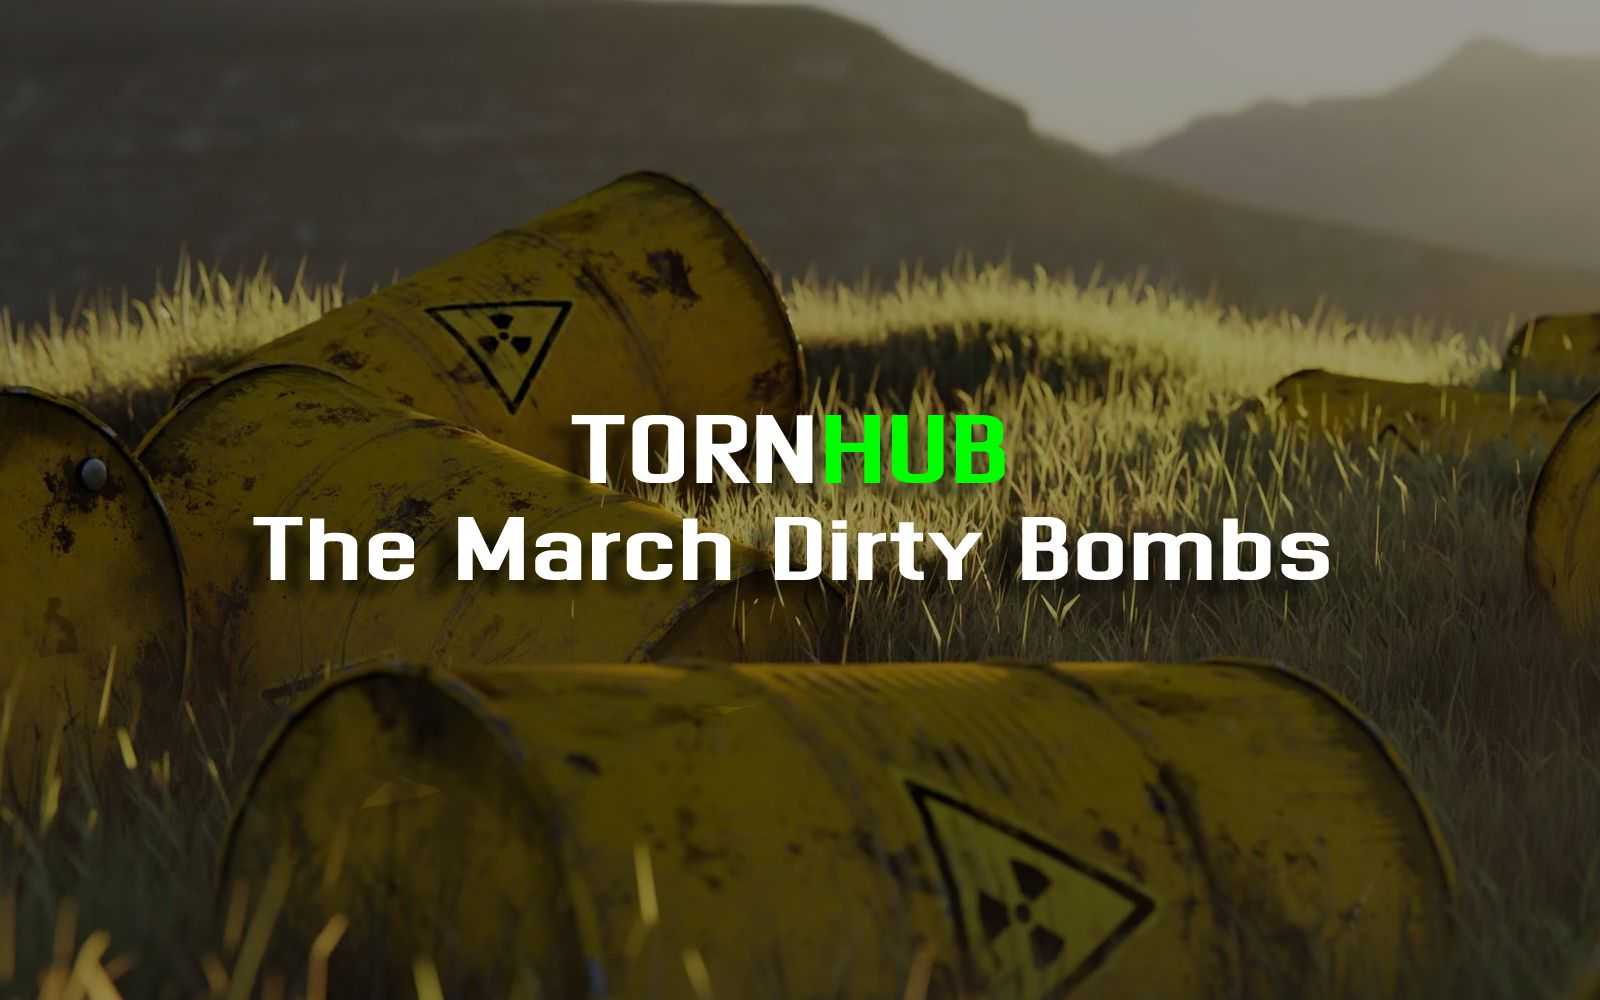 The March Dirty Bombs